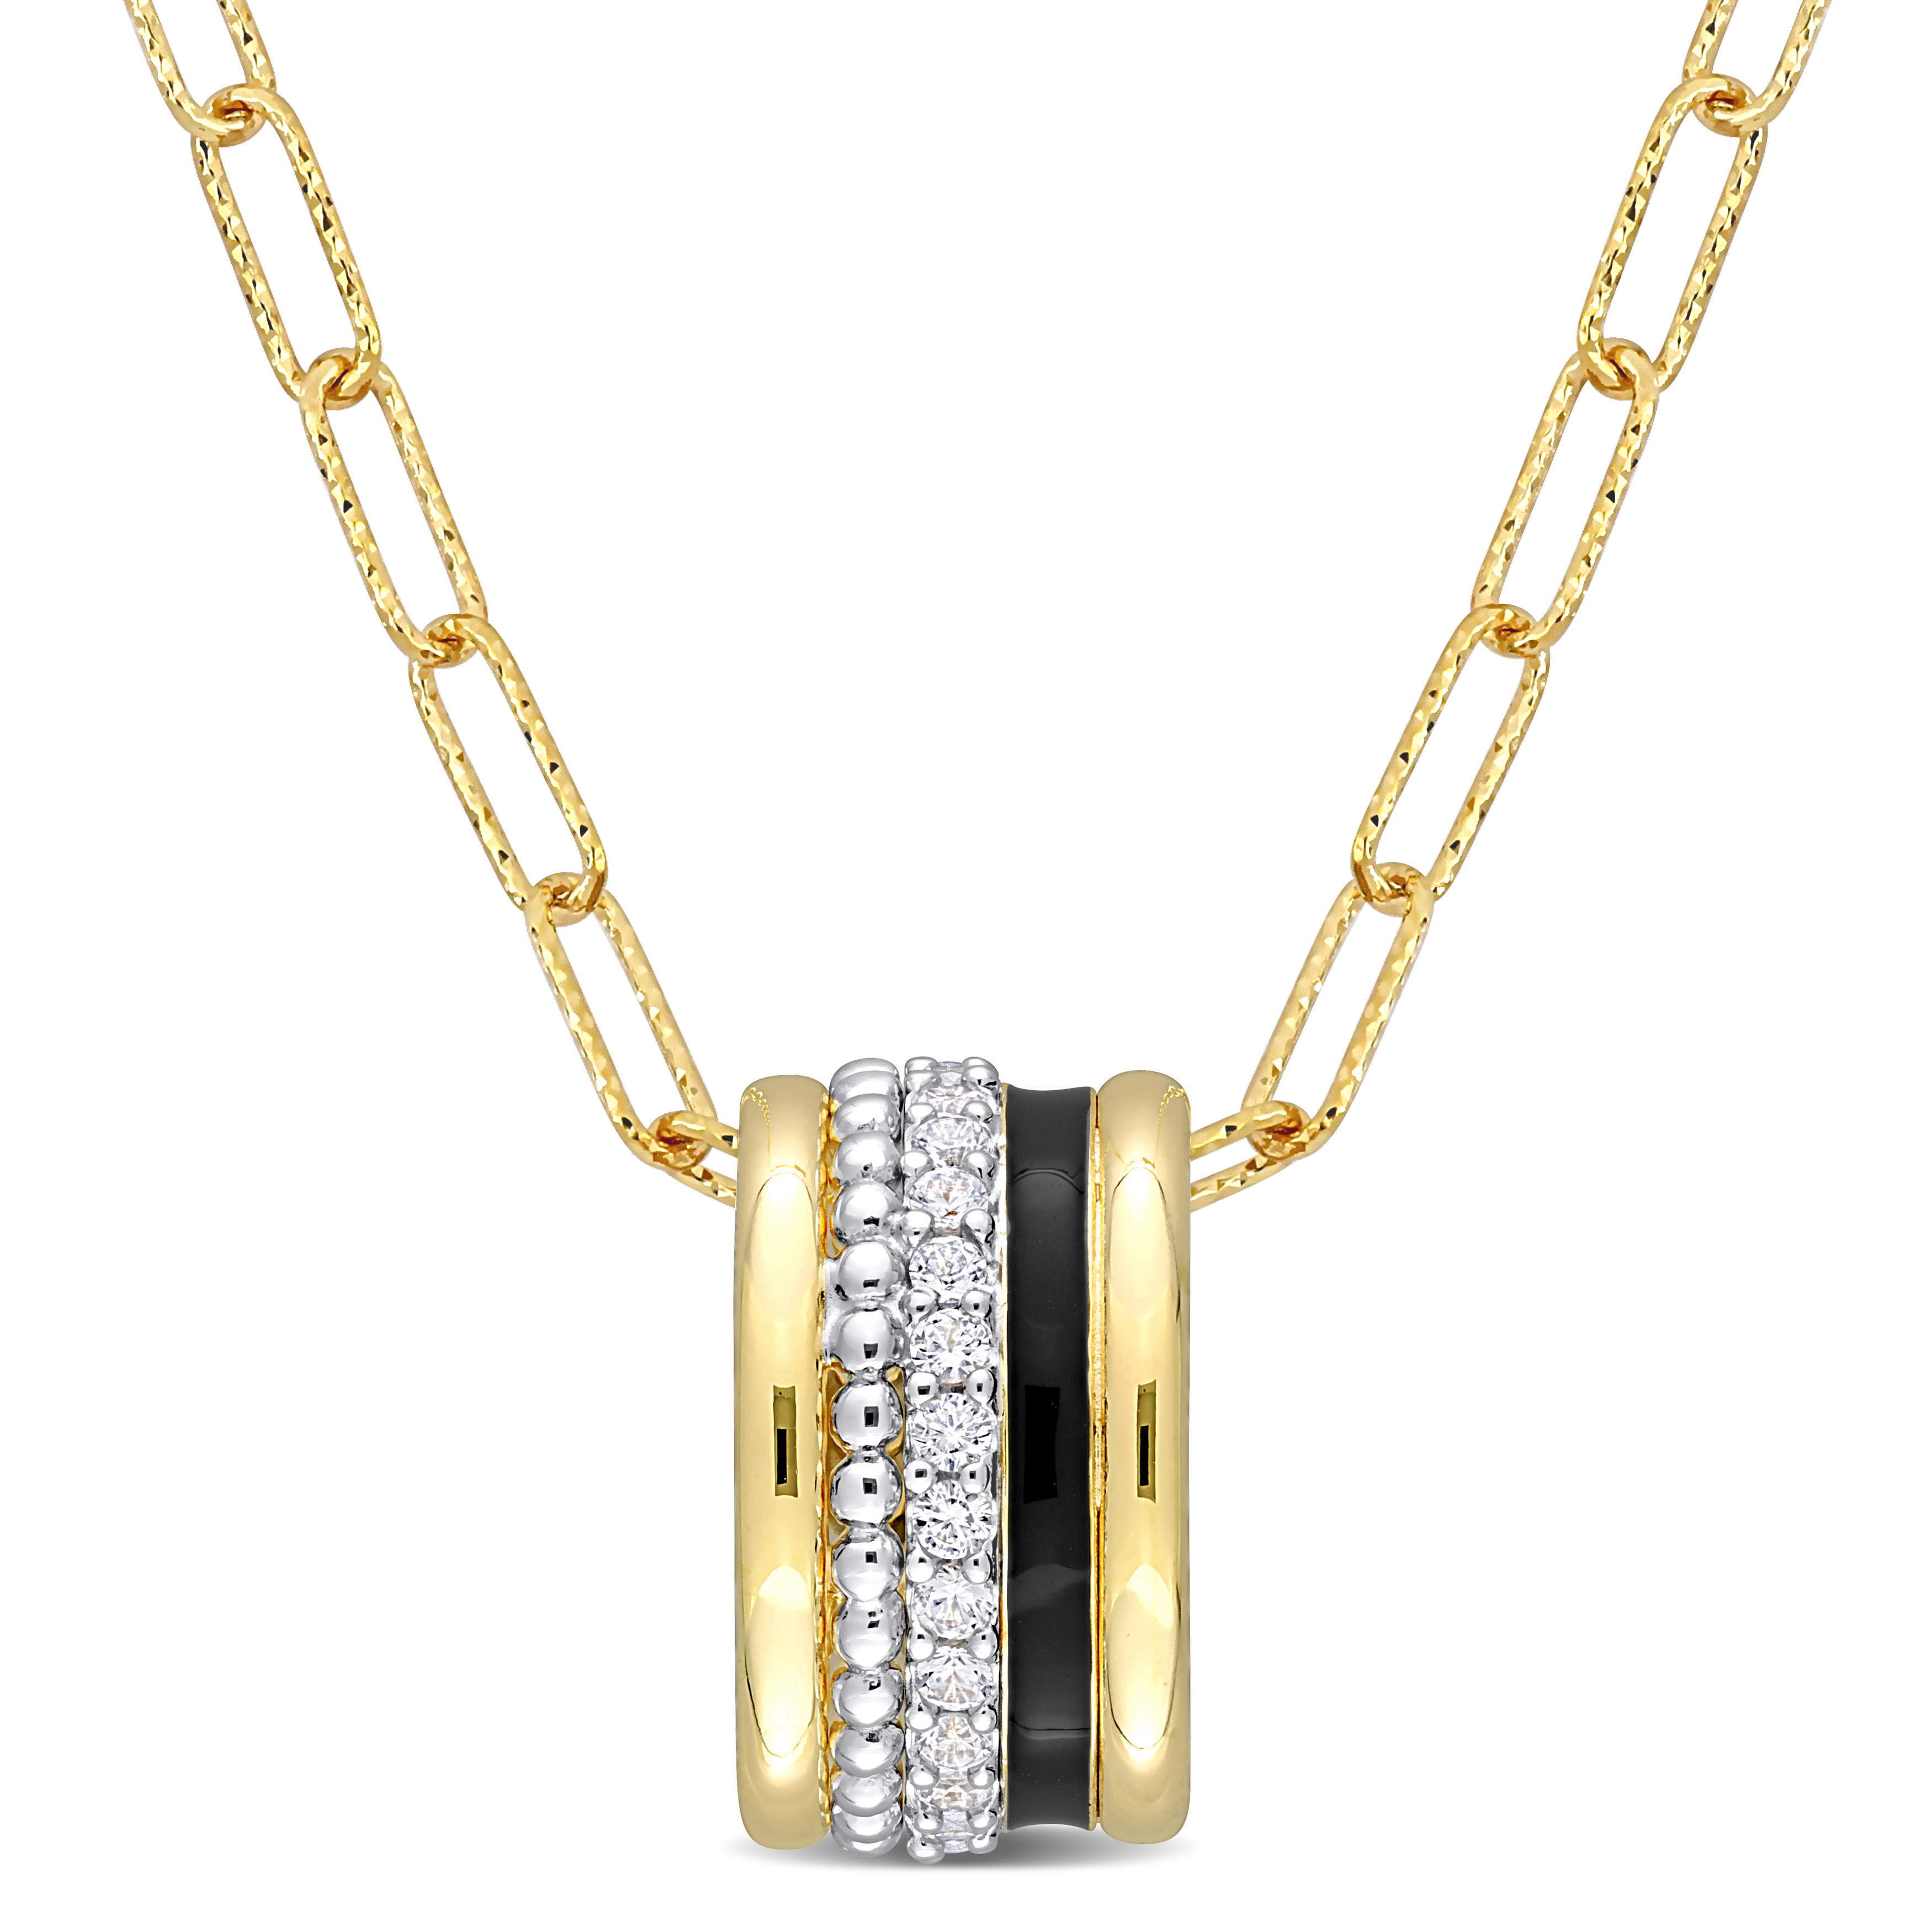 4/5 CT TGW Created White Sapphire Multi-Textured Circular Pendant with Chain in Yellow Plated Sterling Silver - 18 in.